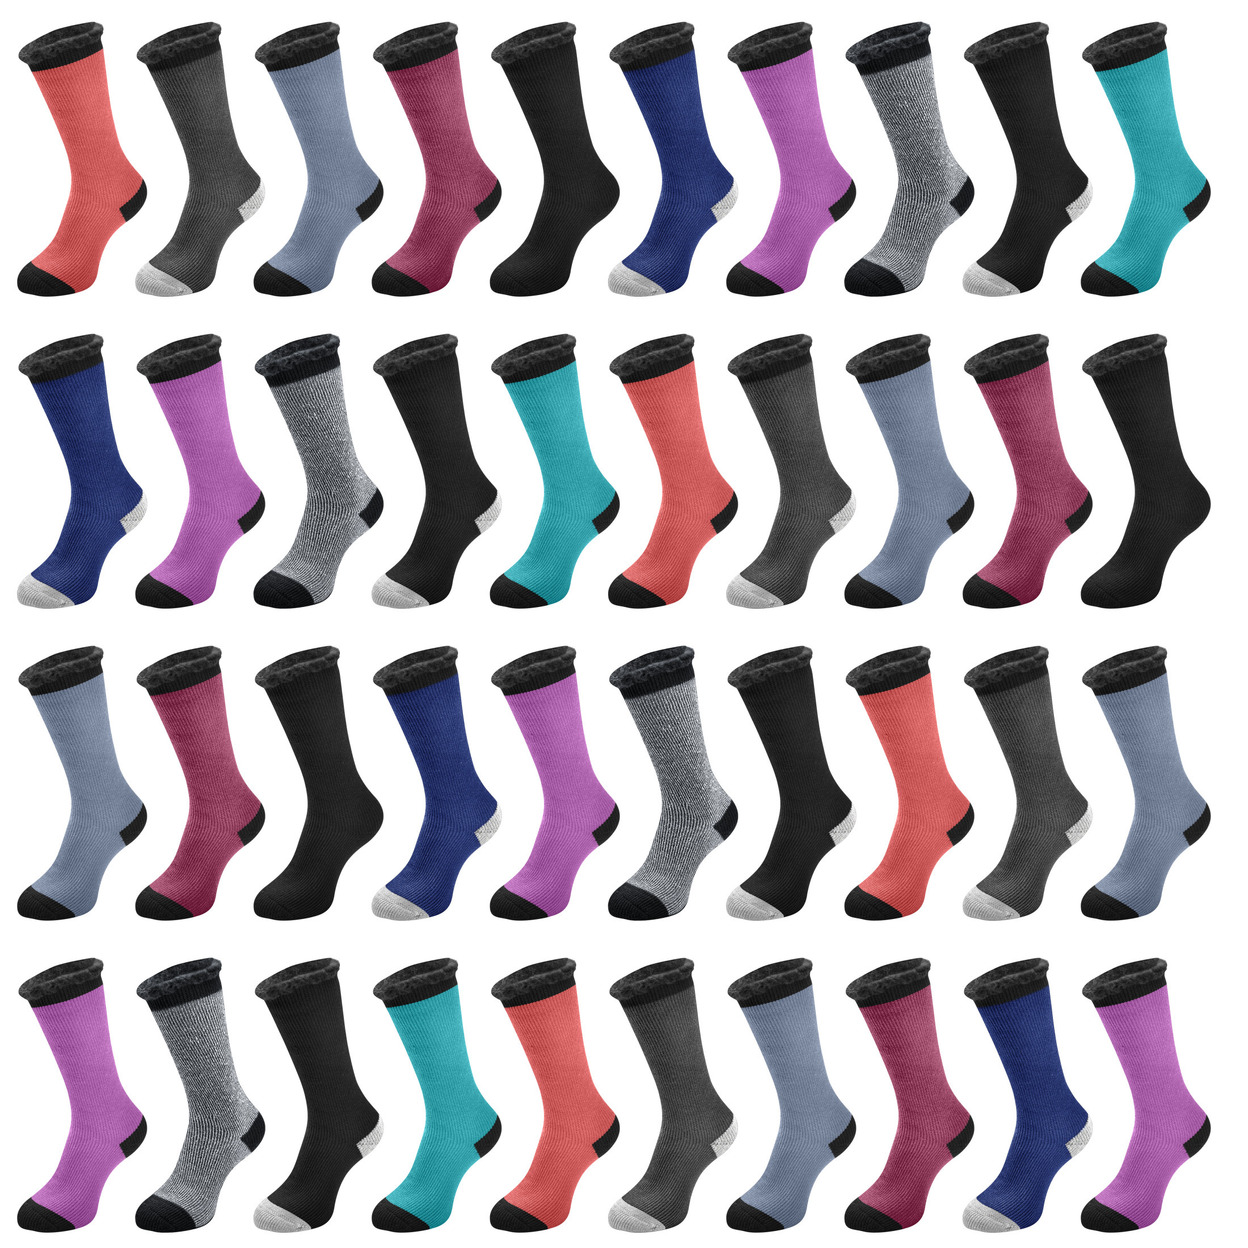 6-Pairs: Men's Thermal-Insulated Brushed Lined Warm Heated Winter Socks For Cold Weather